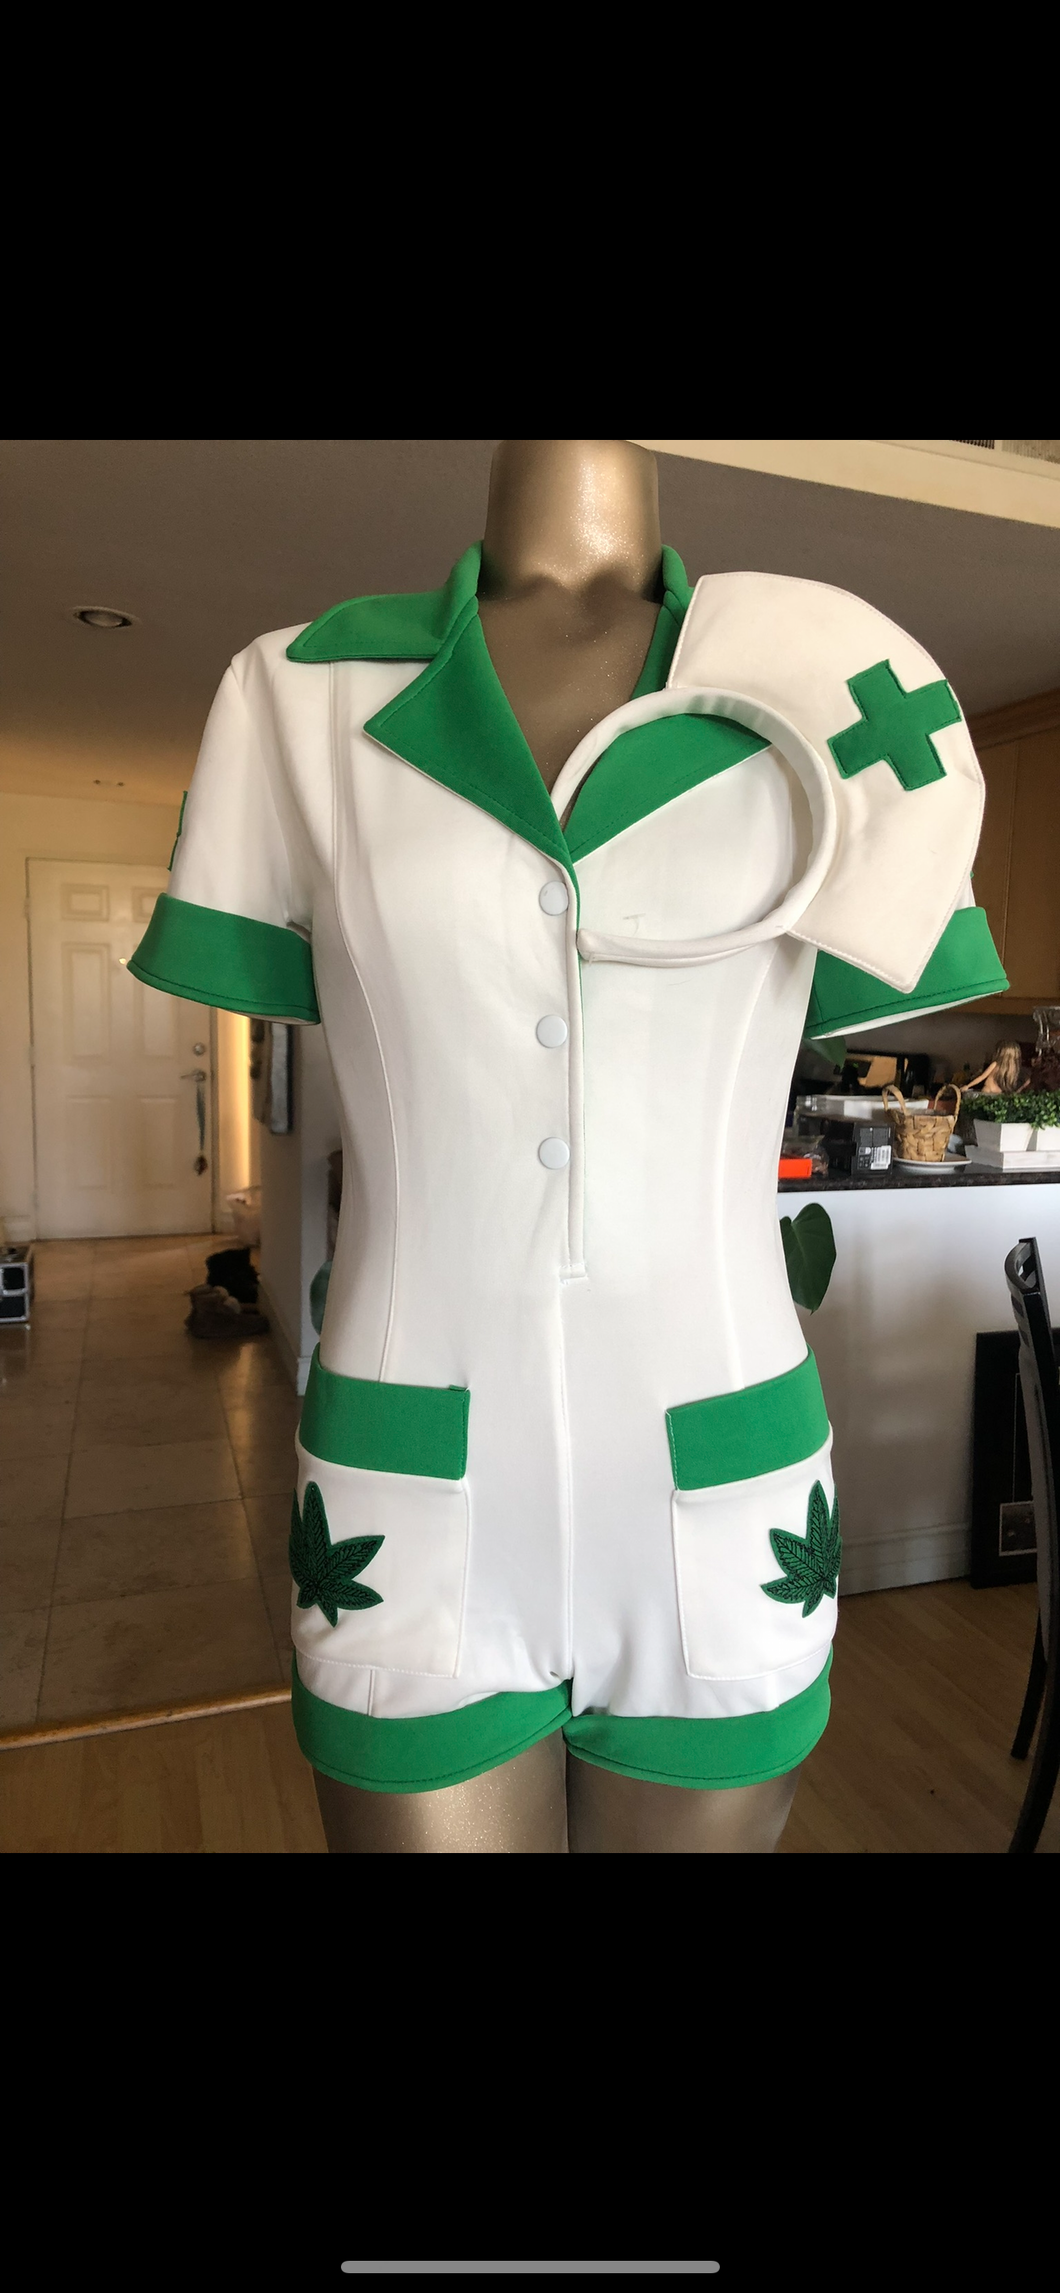 420 Nurse Outfit size Small